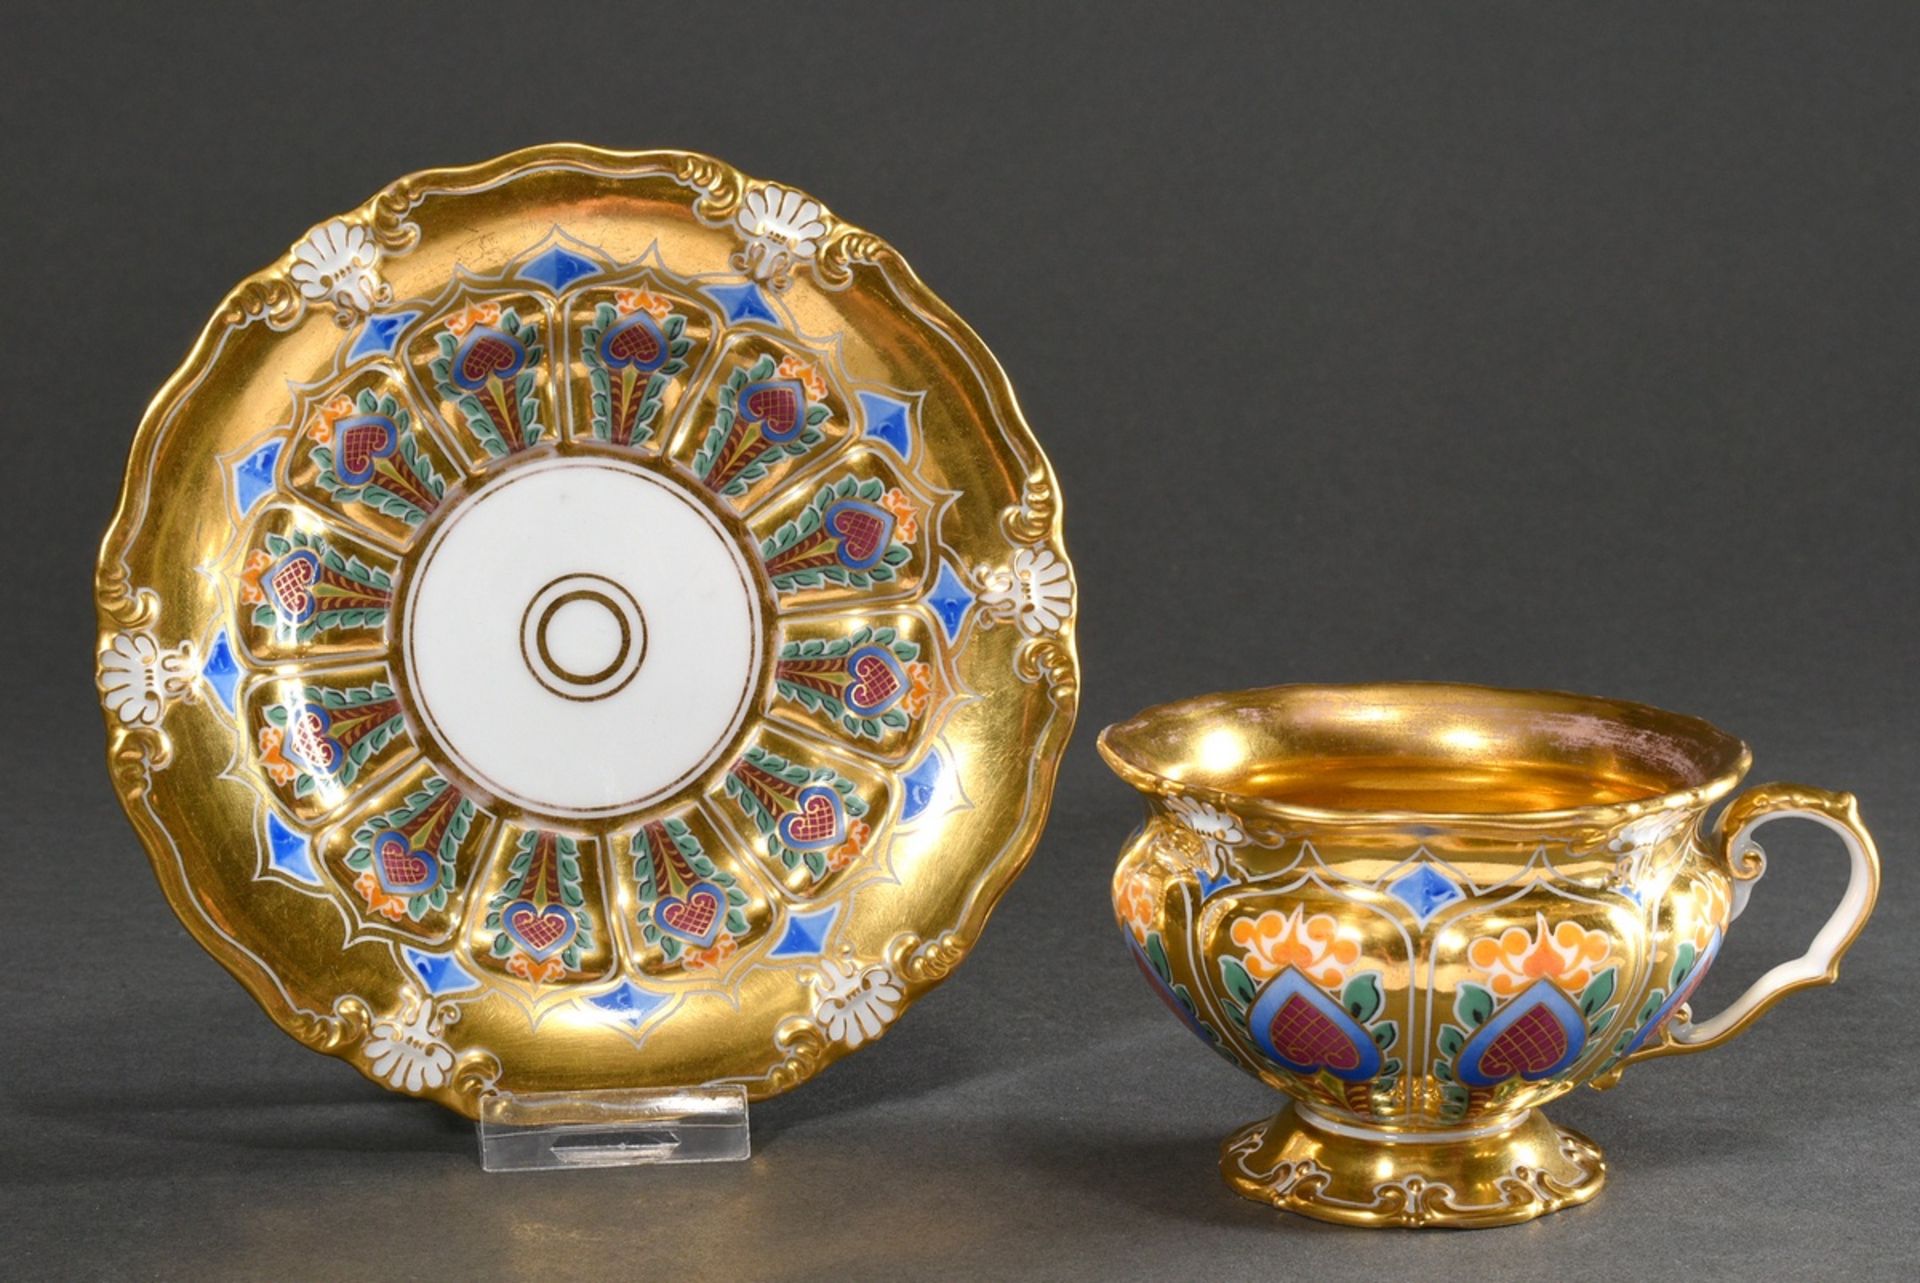 Biedermeier KPM cup with humped wall and strong coloured ornaments on gold ground in fine painting 